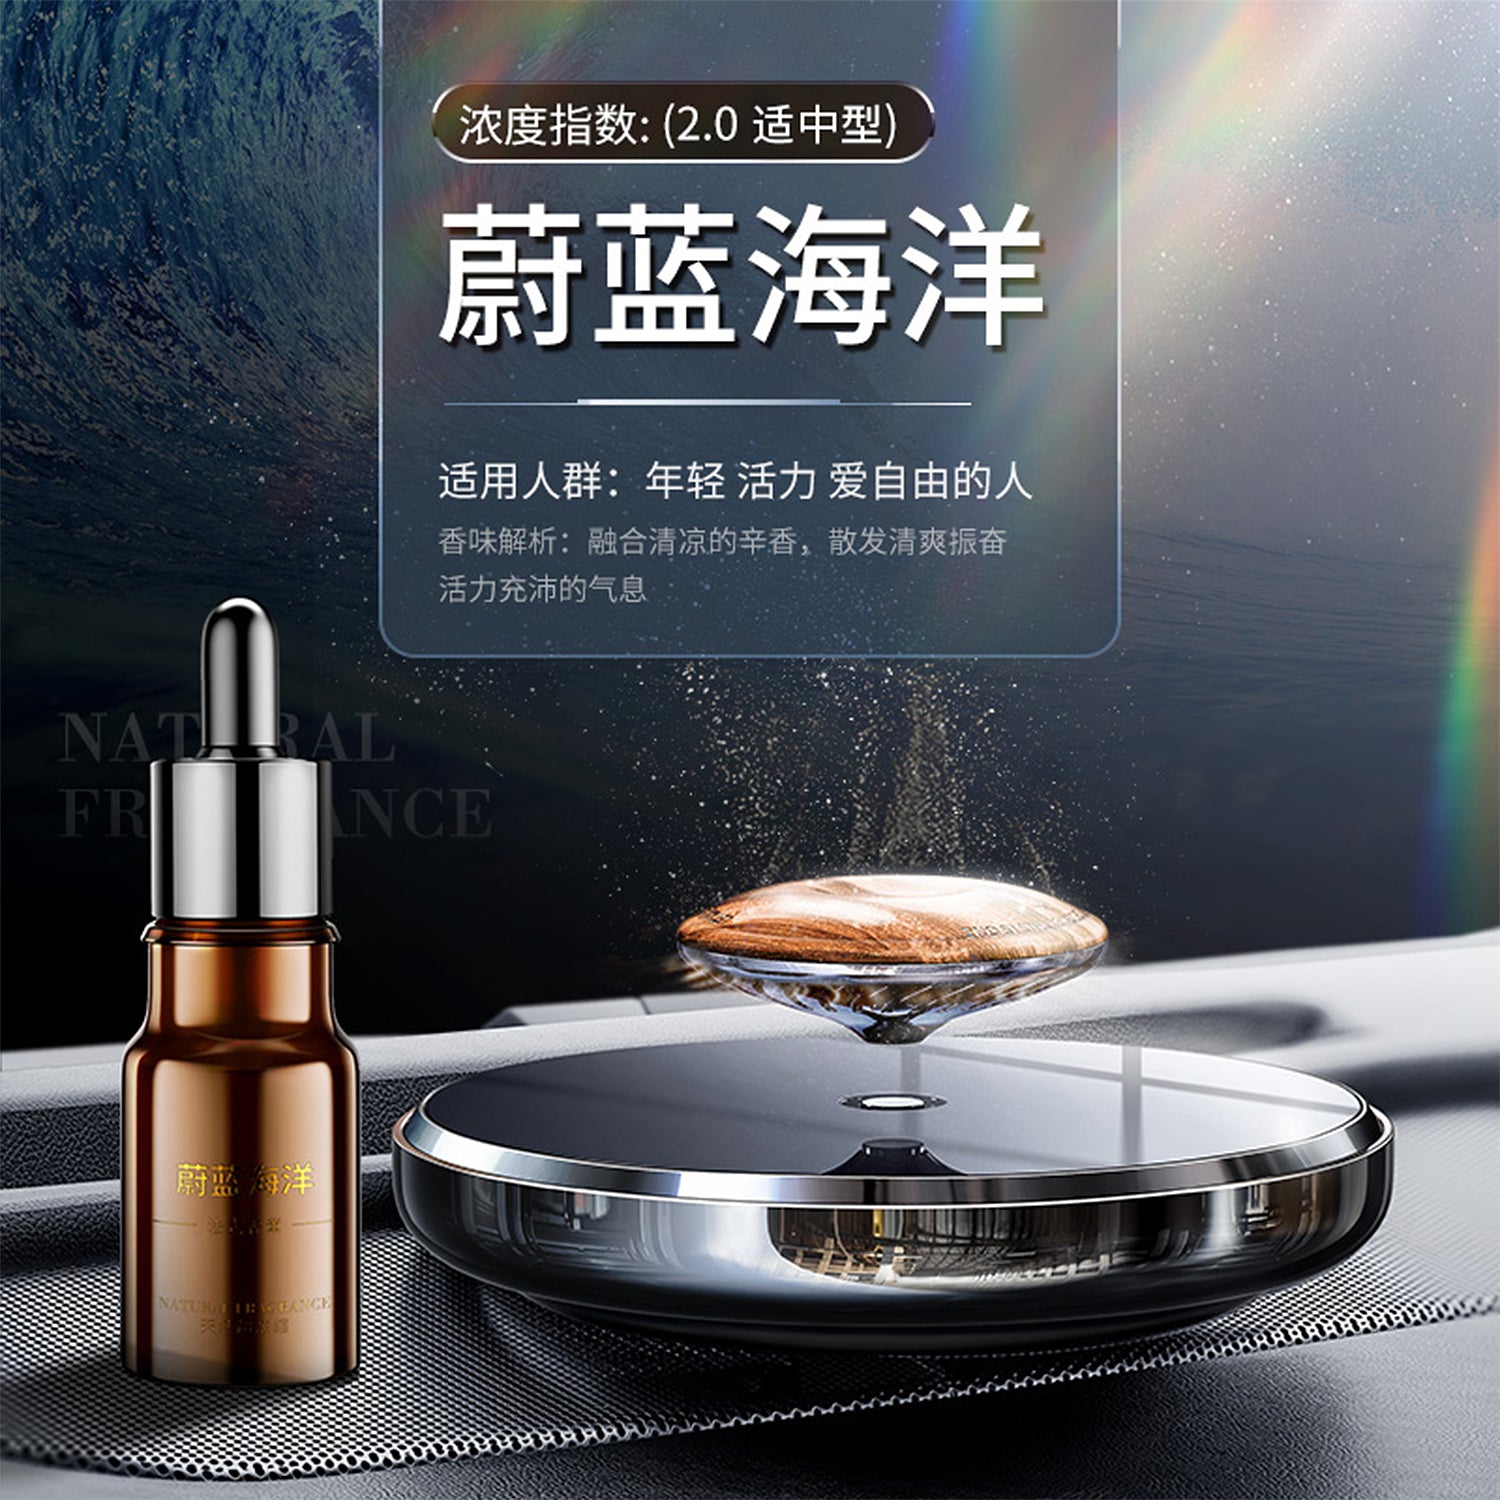 Solar-Powered Car-Mounted Aroma Diffuser With Floating And Rotating Design, Creative Car Accessory And Gift With Scented Features